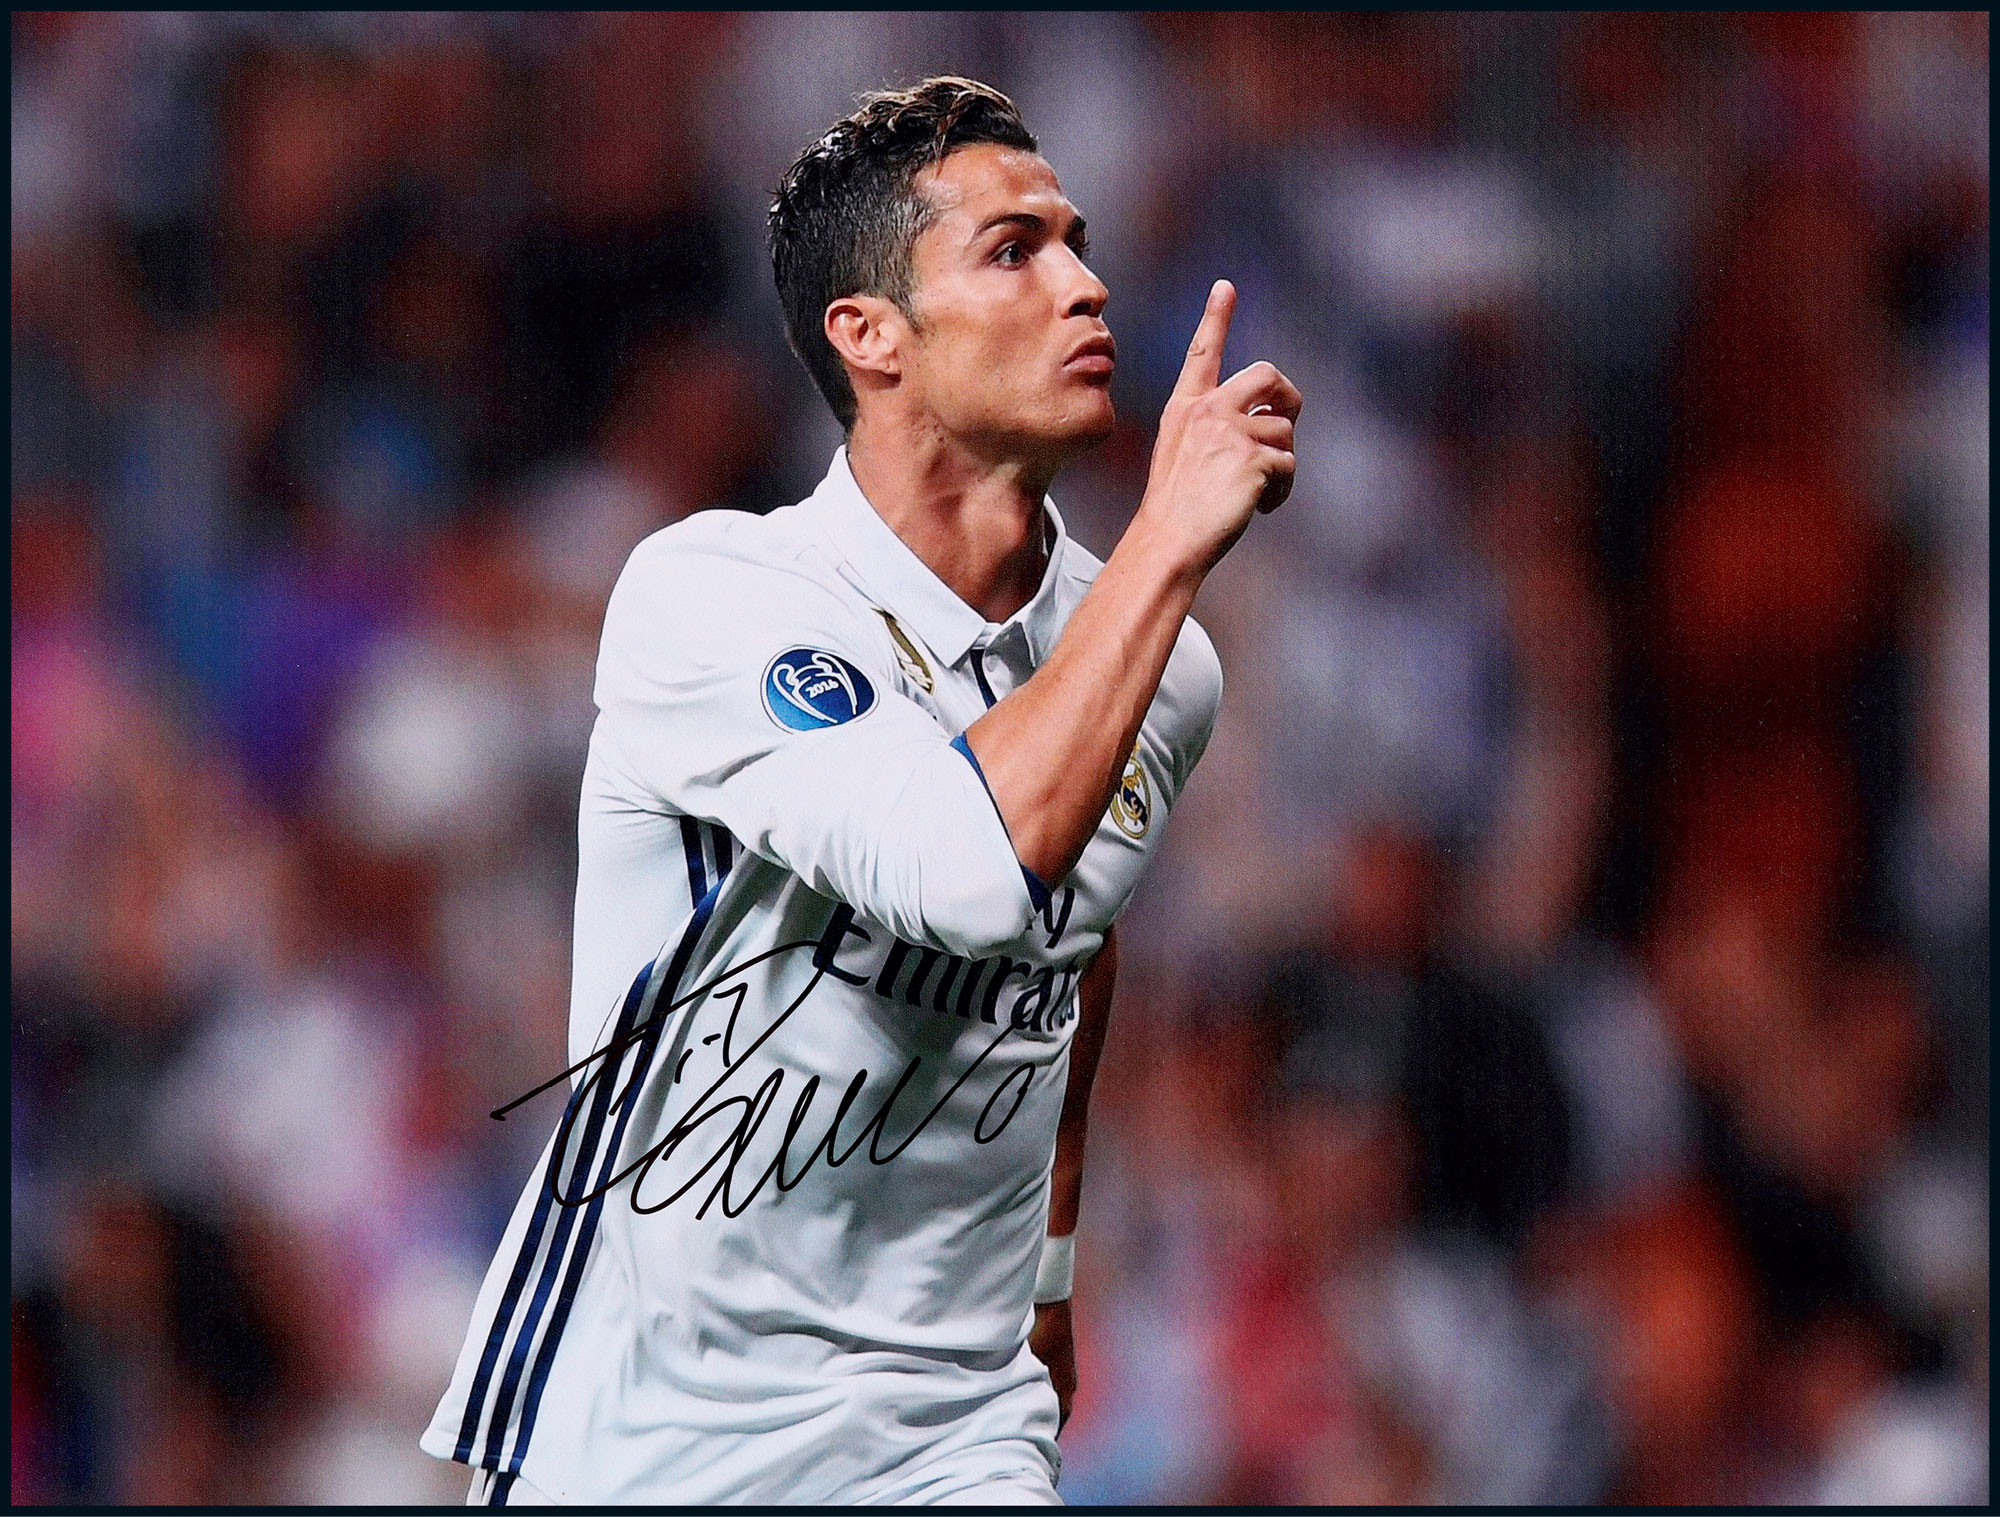 The autographed photo of Cristiano Ronaldo, the “FIFA world player”, with certificate